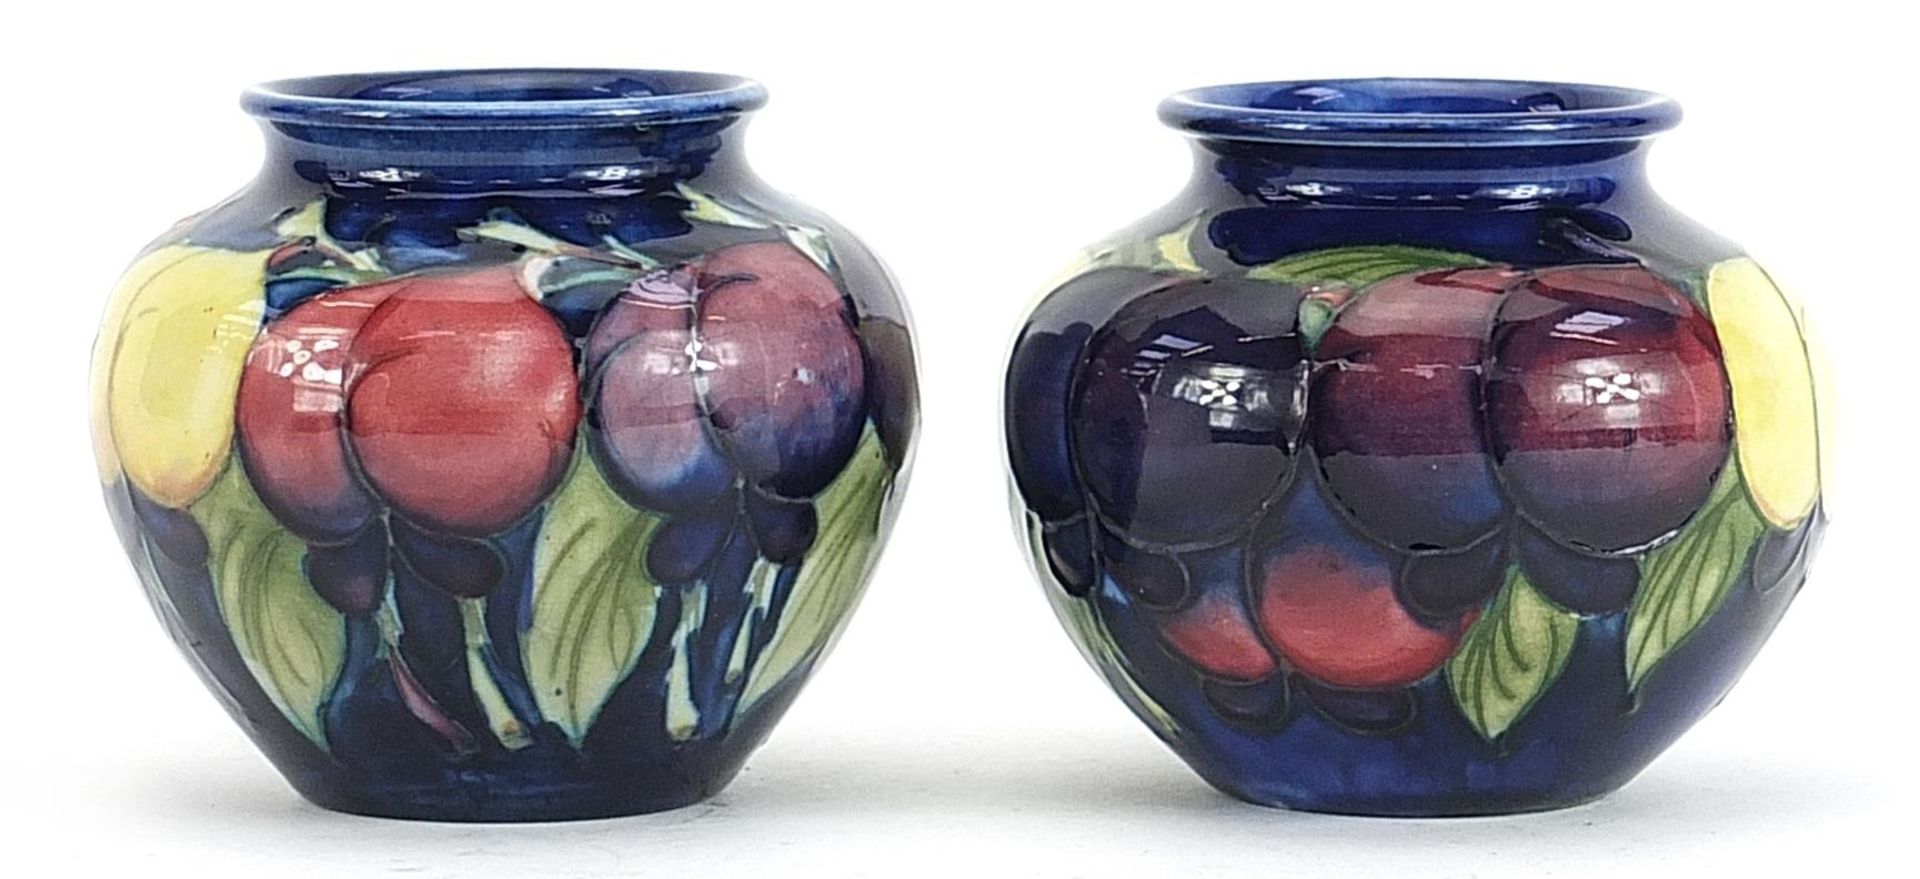 Pair of Moorcroft Pottery vases hand painted with fruits, each 7cm high